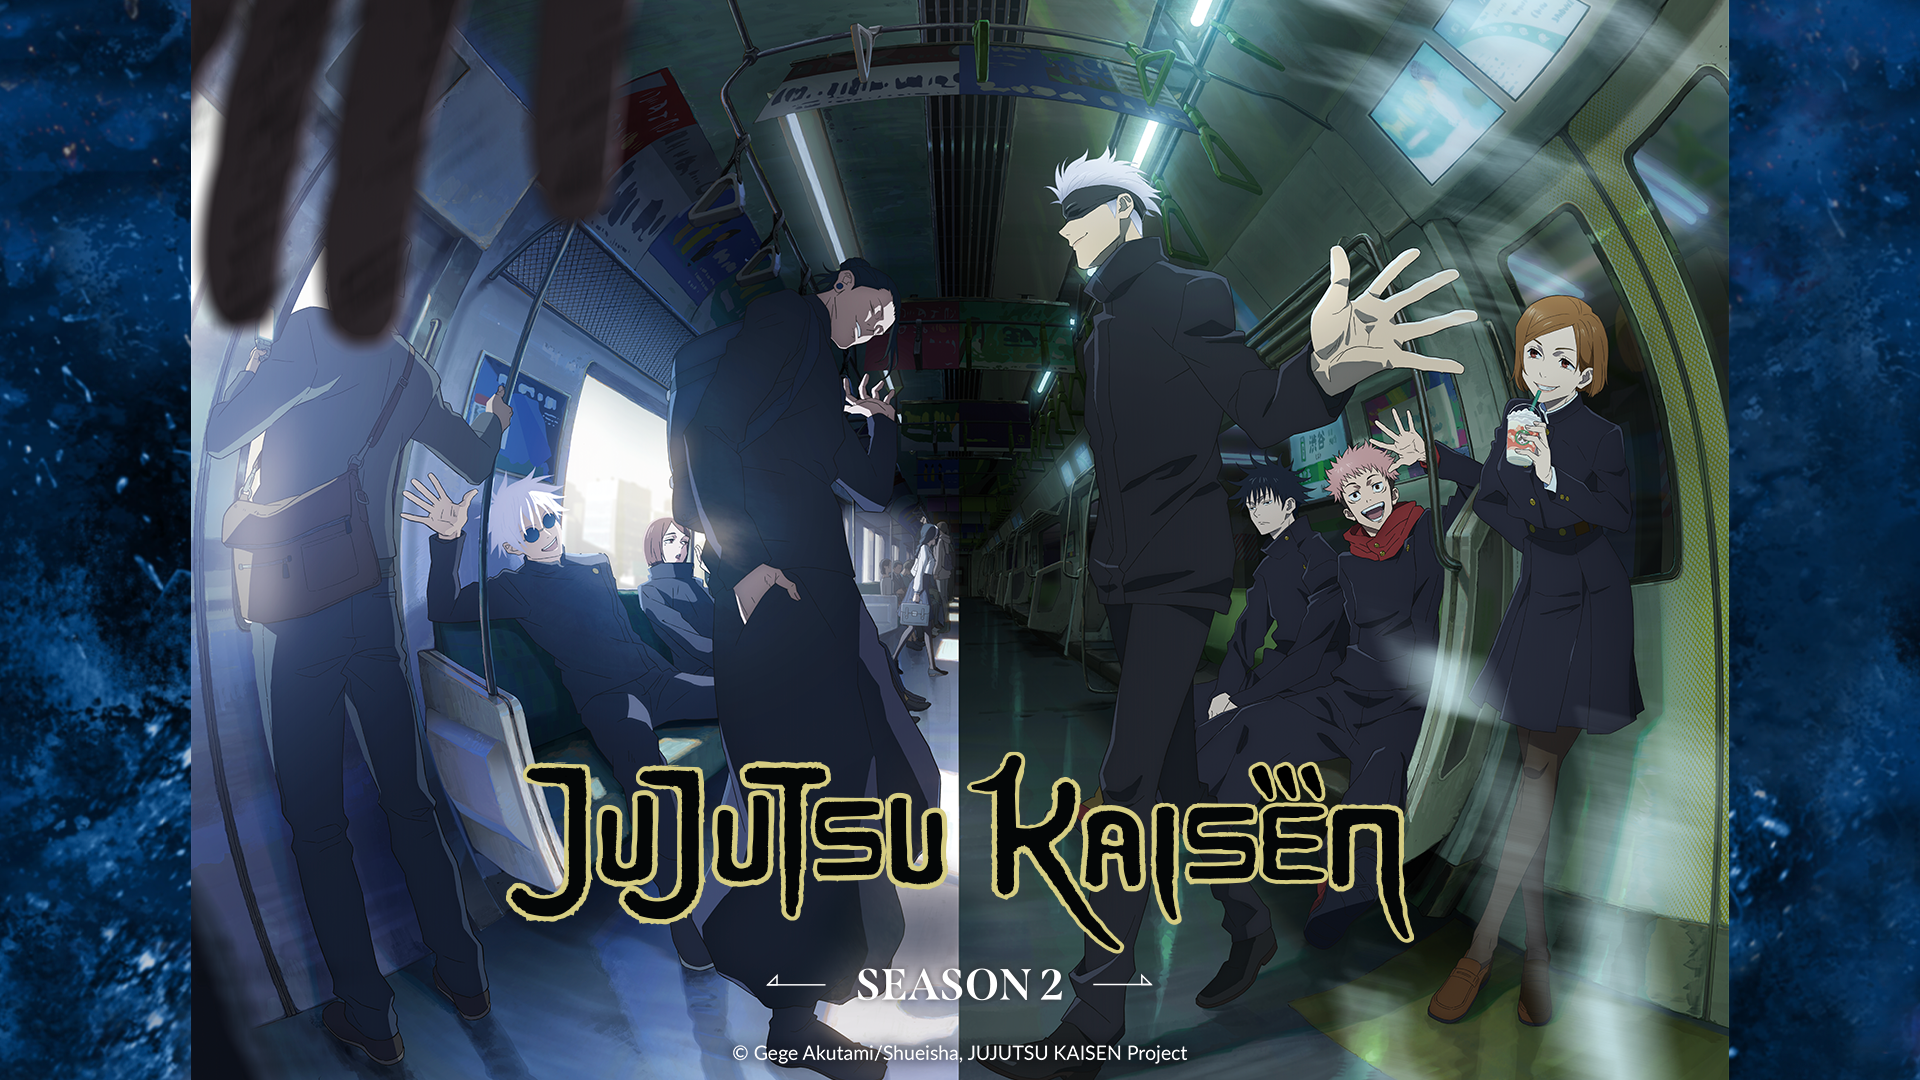 How many seasons of Jujutsu Kaisen are there?